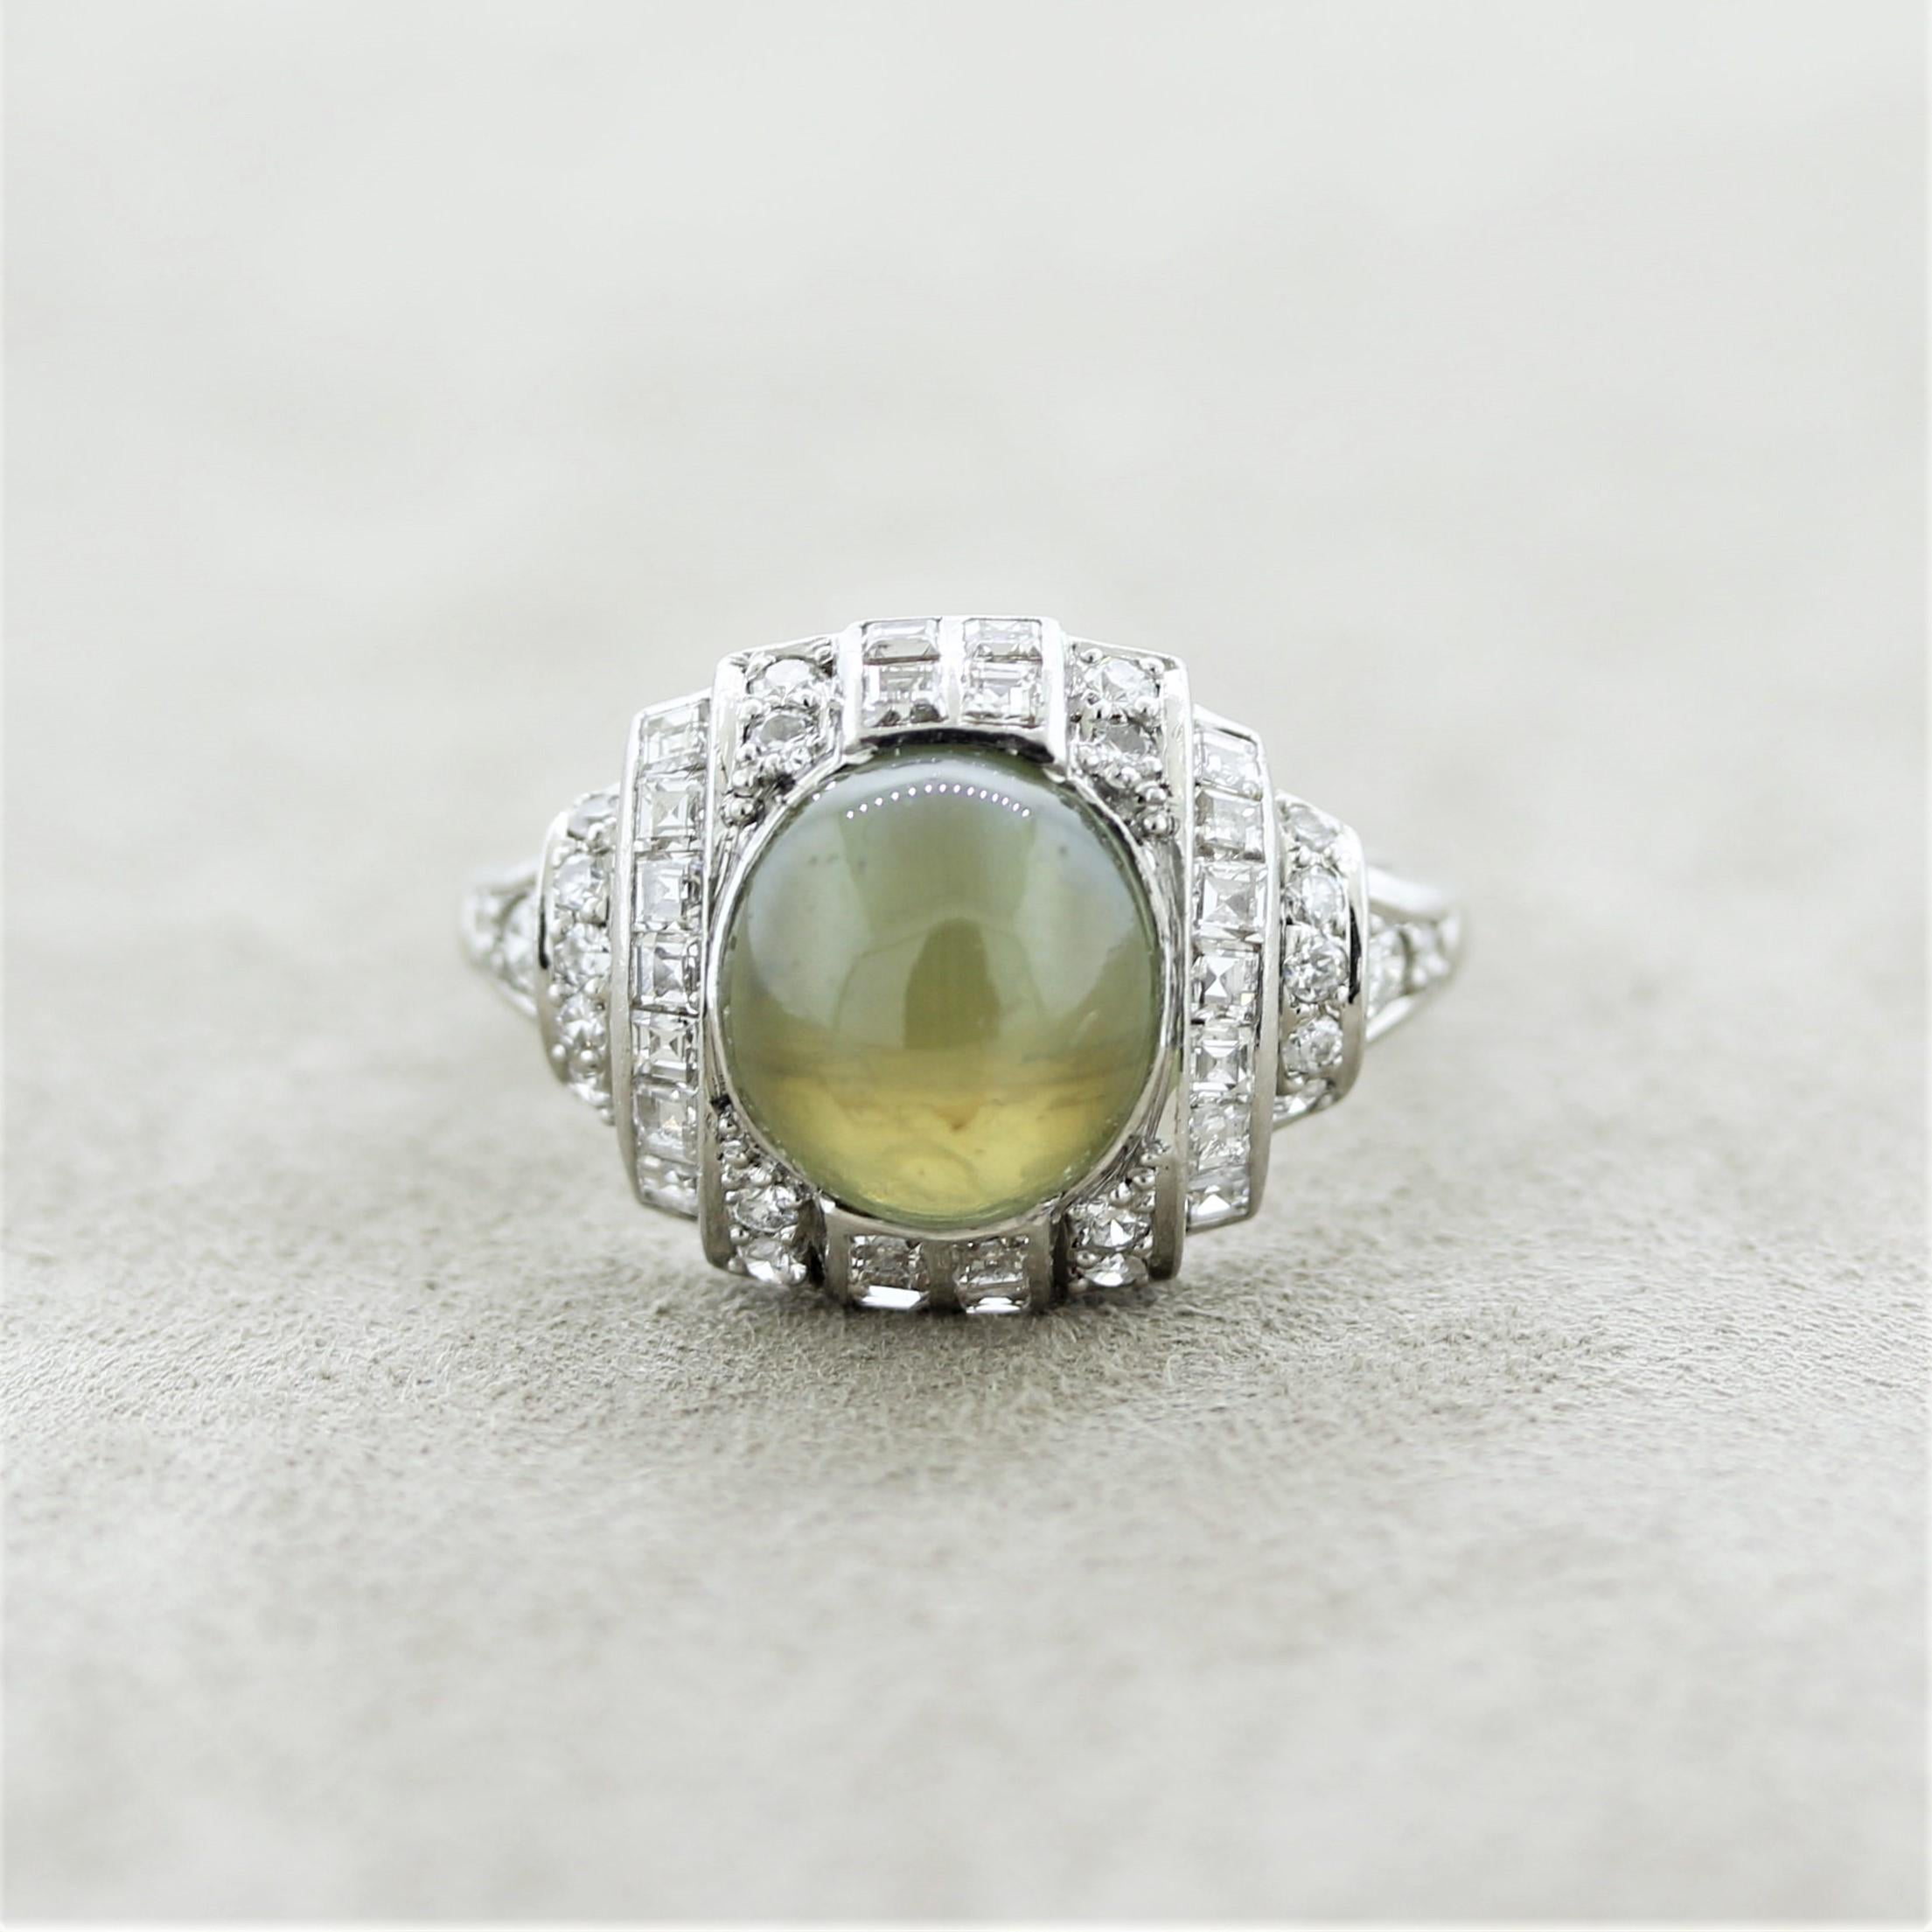 A treasure from the 1920’s Art Deco period featuring a 5.75 carat cats eye chrysoberyl. It has the ideal Milk & Honey color which is highly sought after as well as a strong and reflective cats eye. It is complemented by round and square shape